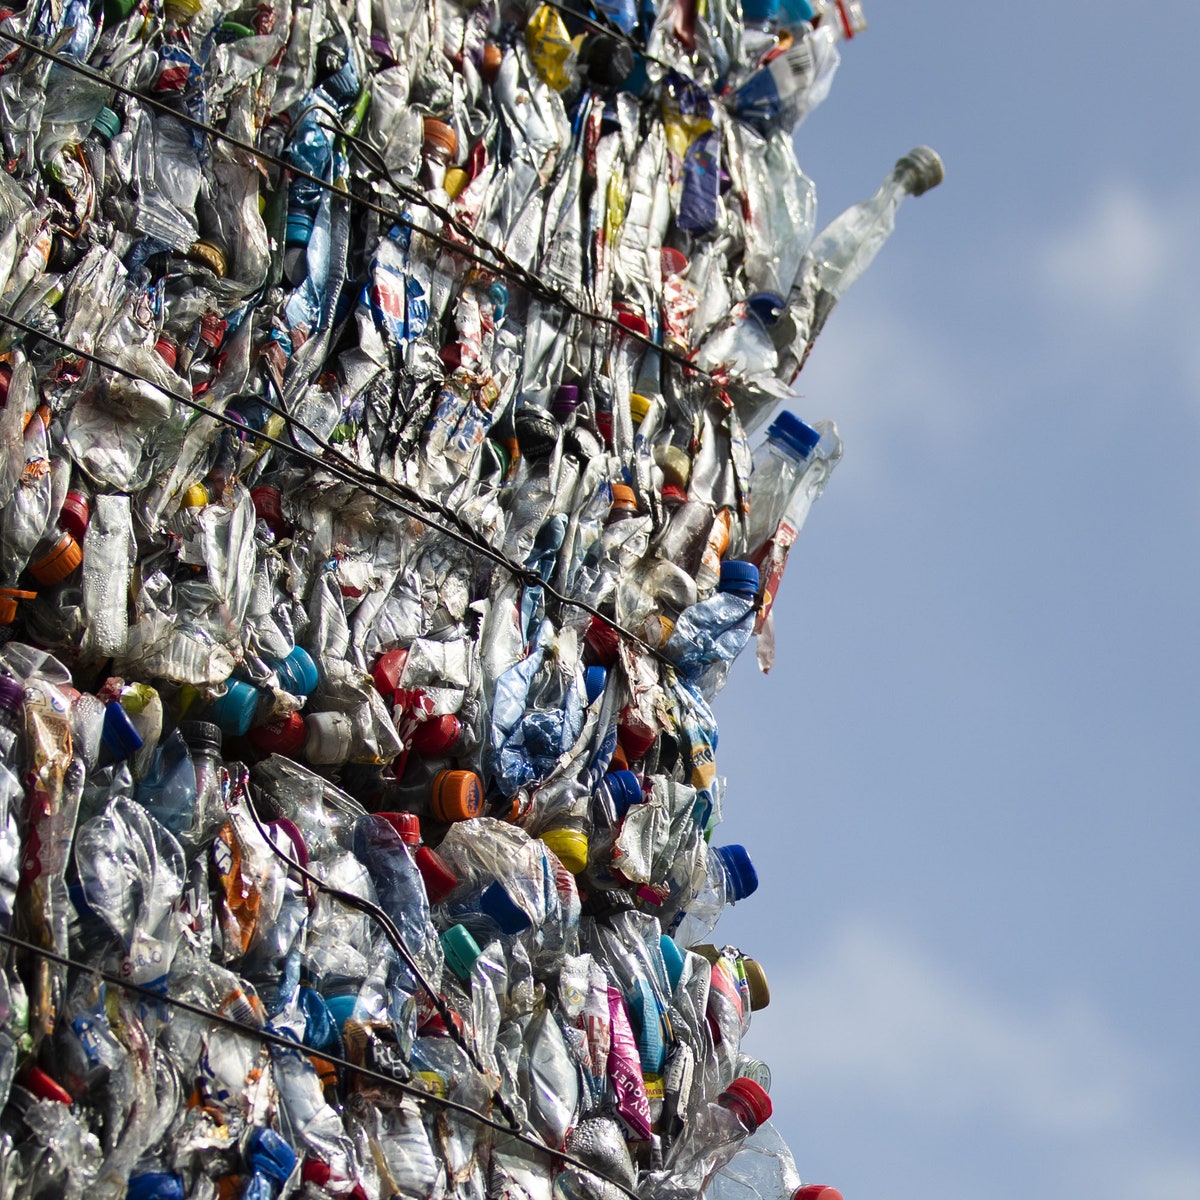 Plastic is plaguing lower-income countries. Where does fashion fit in?